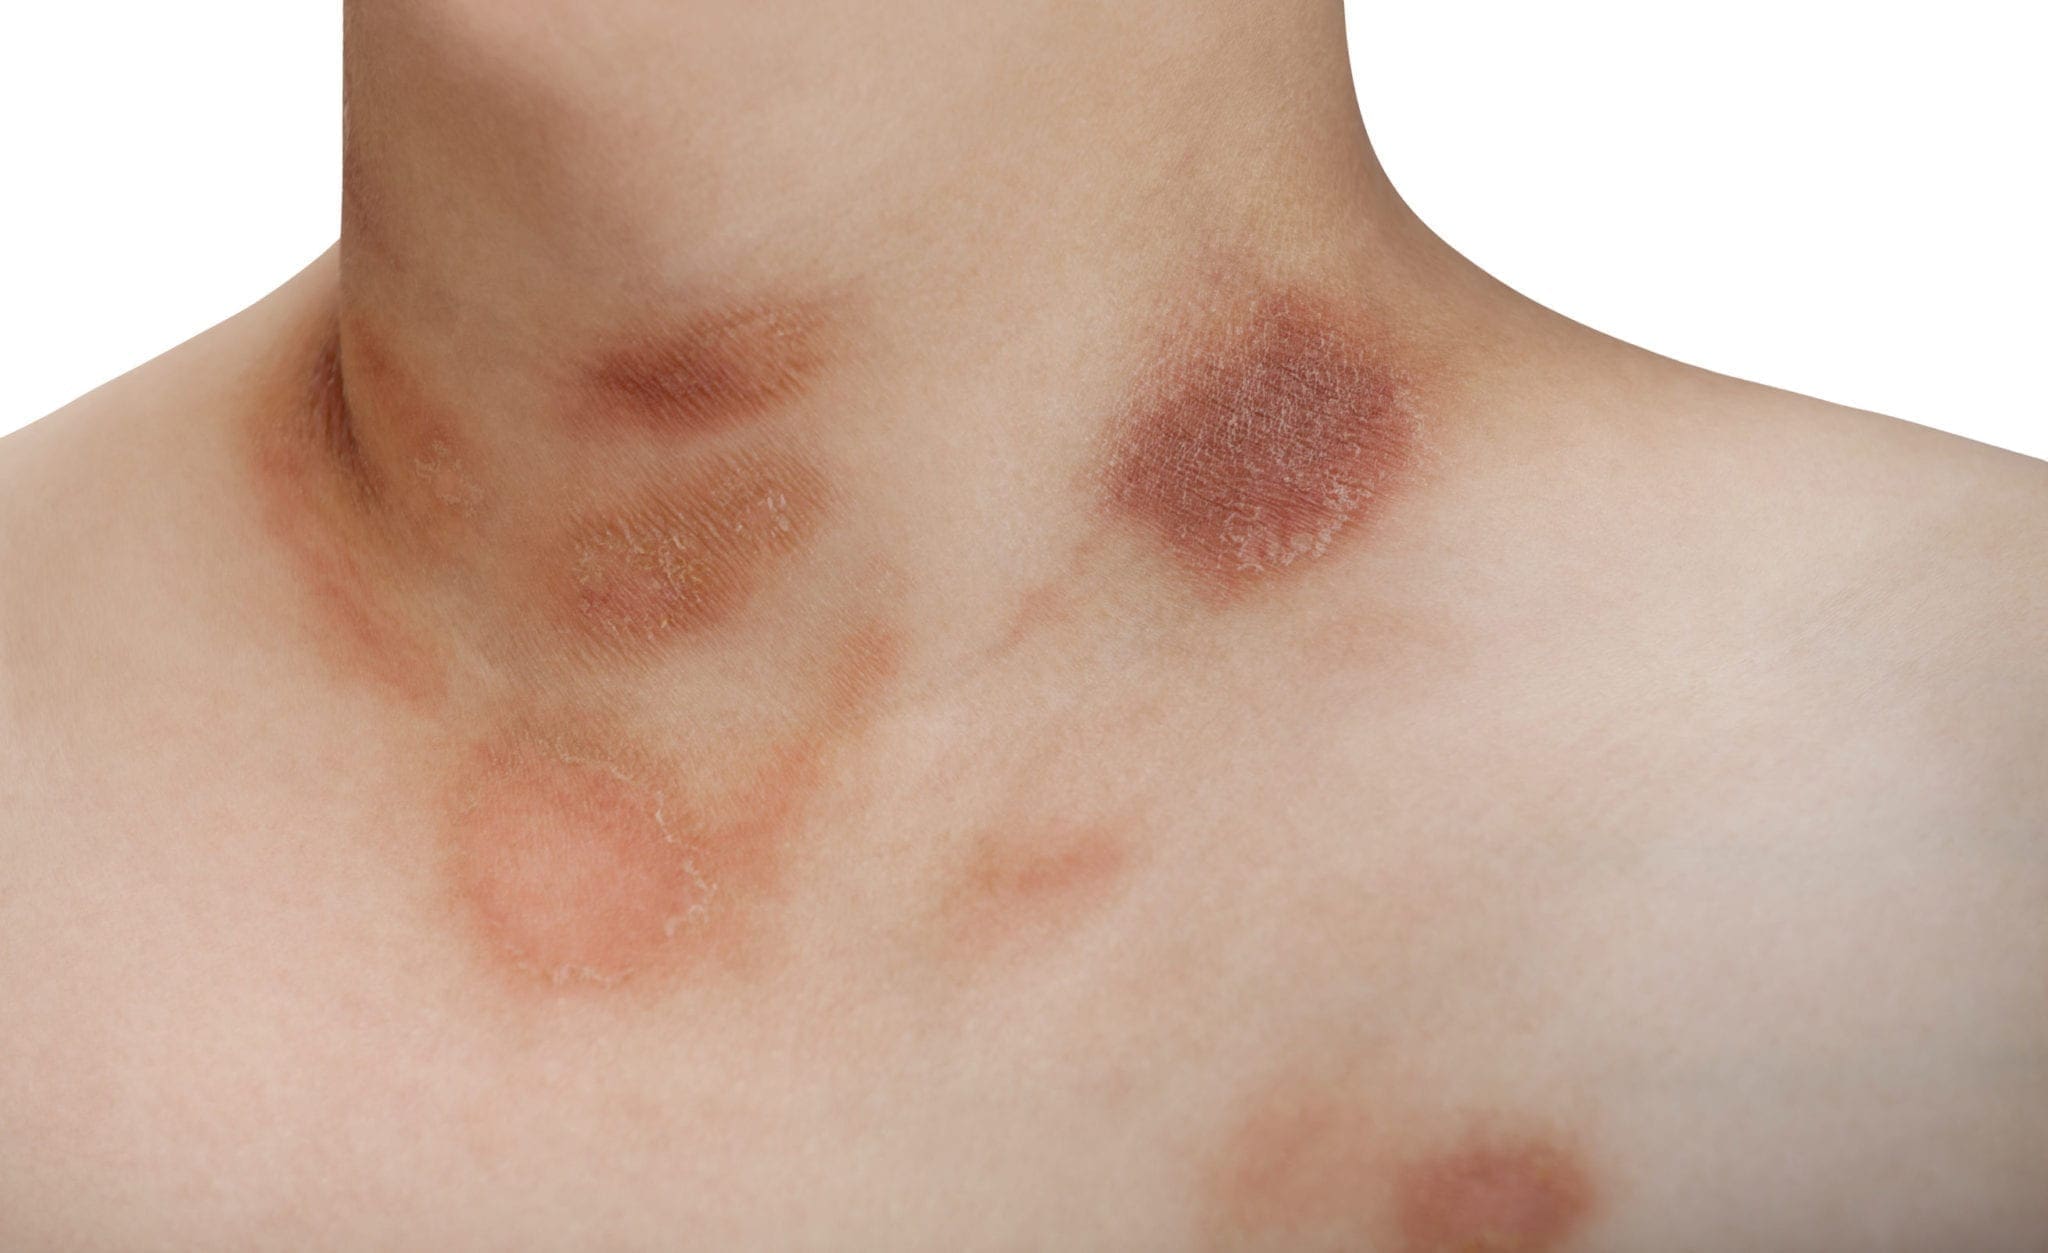 What Is Pityriasis Rosea? - Symptoms and Treatment